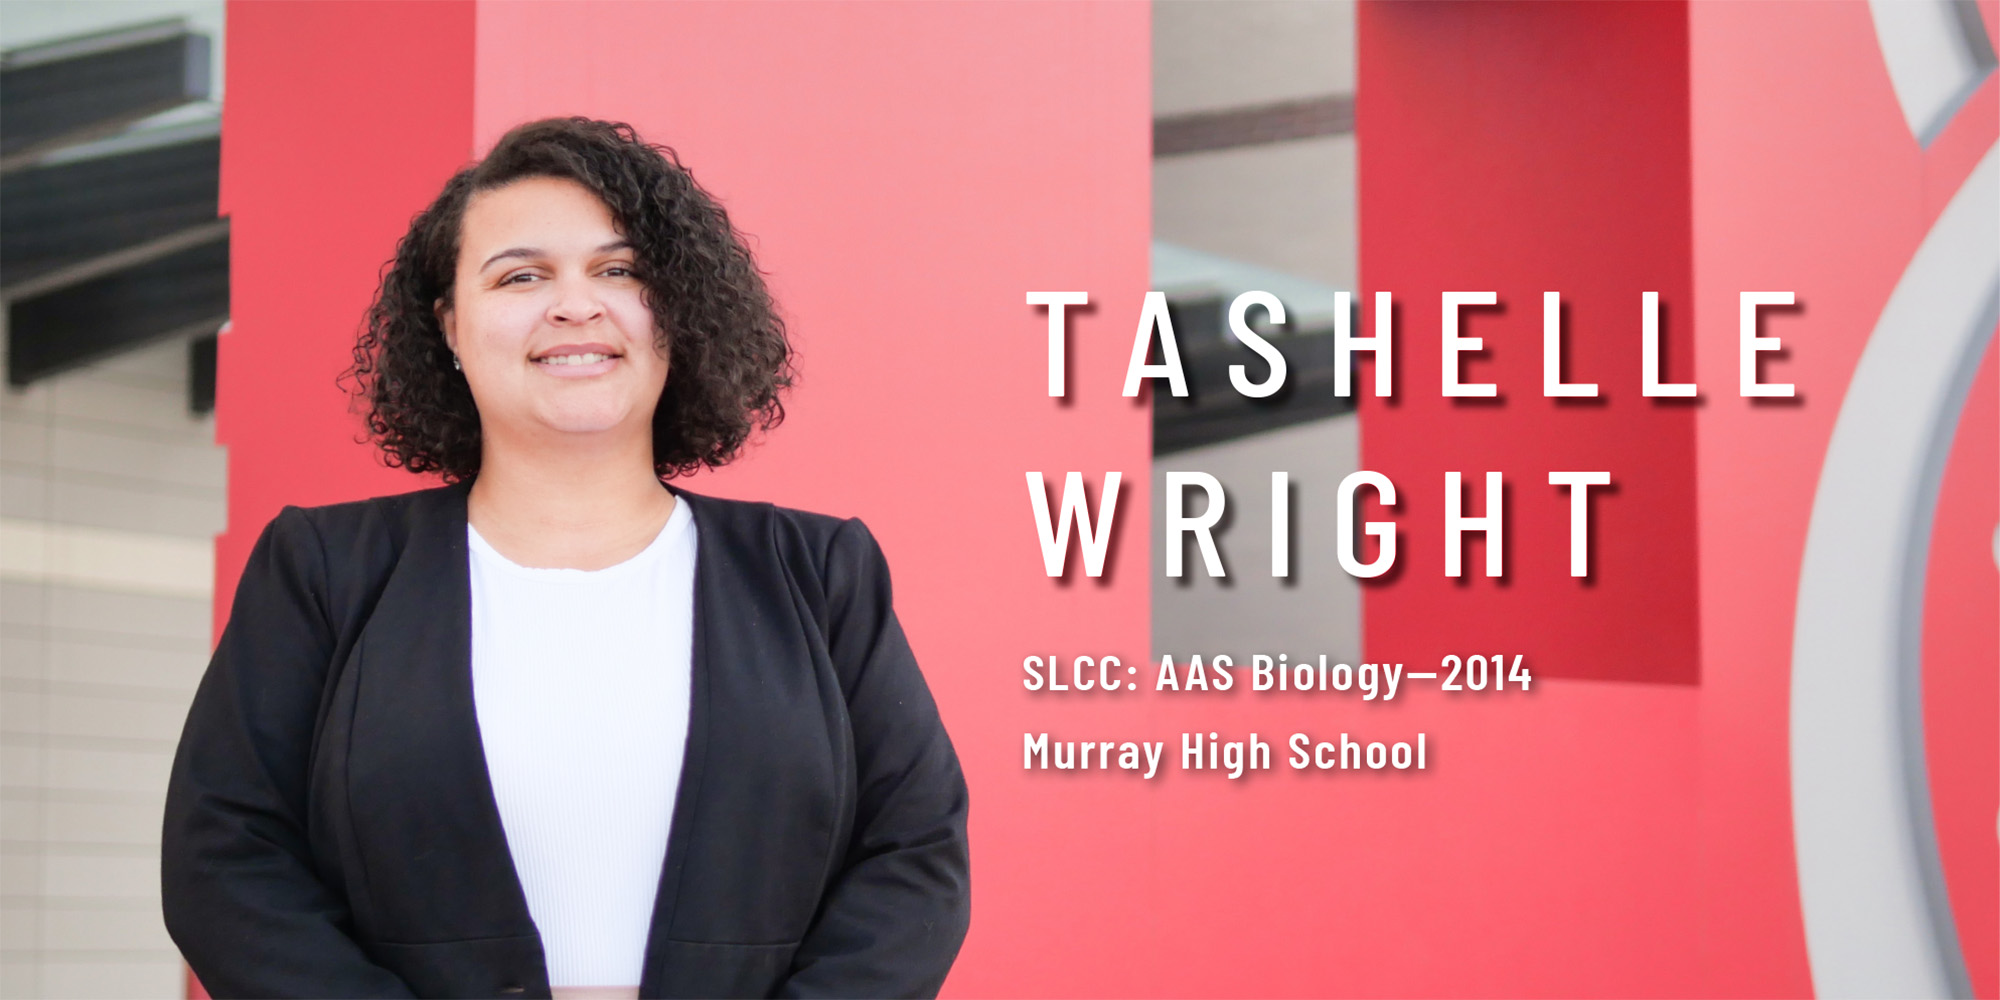 Tashelle Wright, SLCC AAS Biology in 2014, From Murray High School